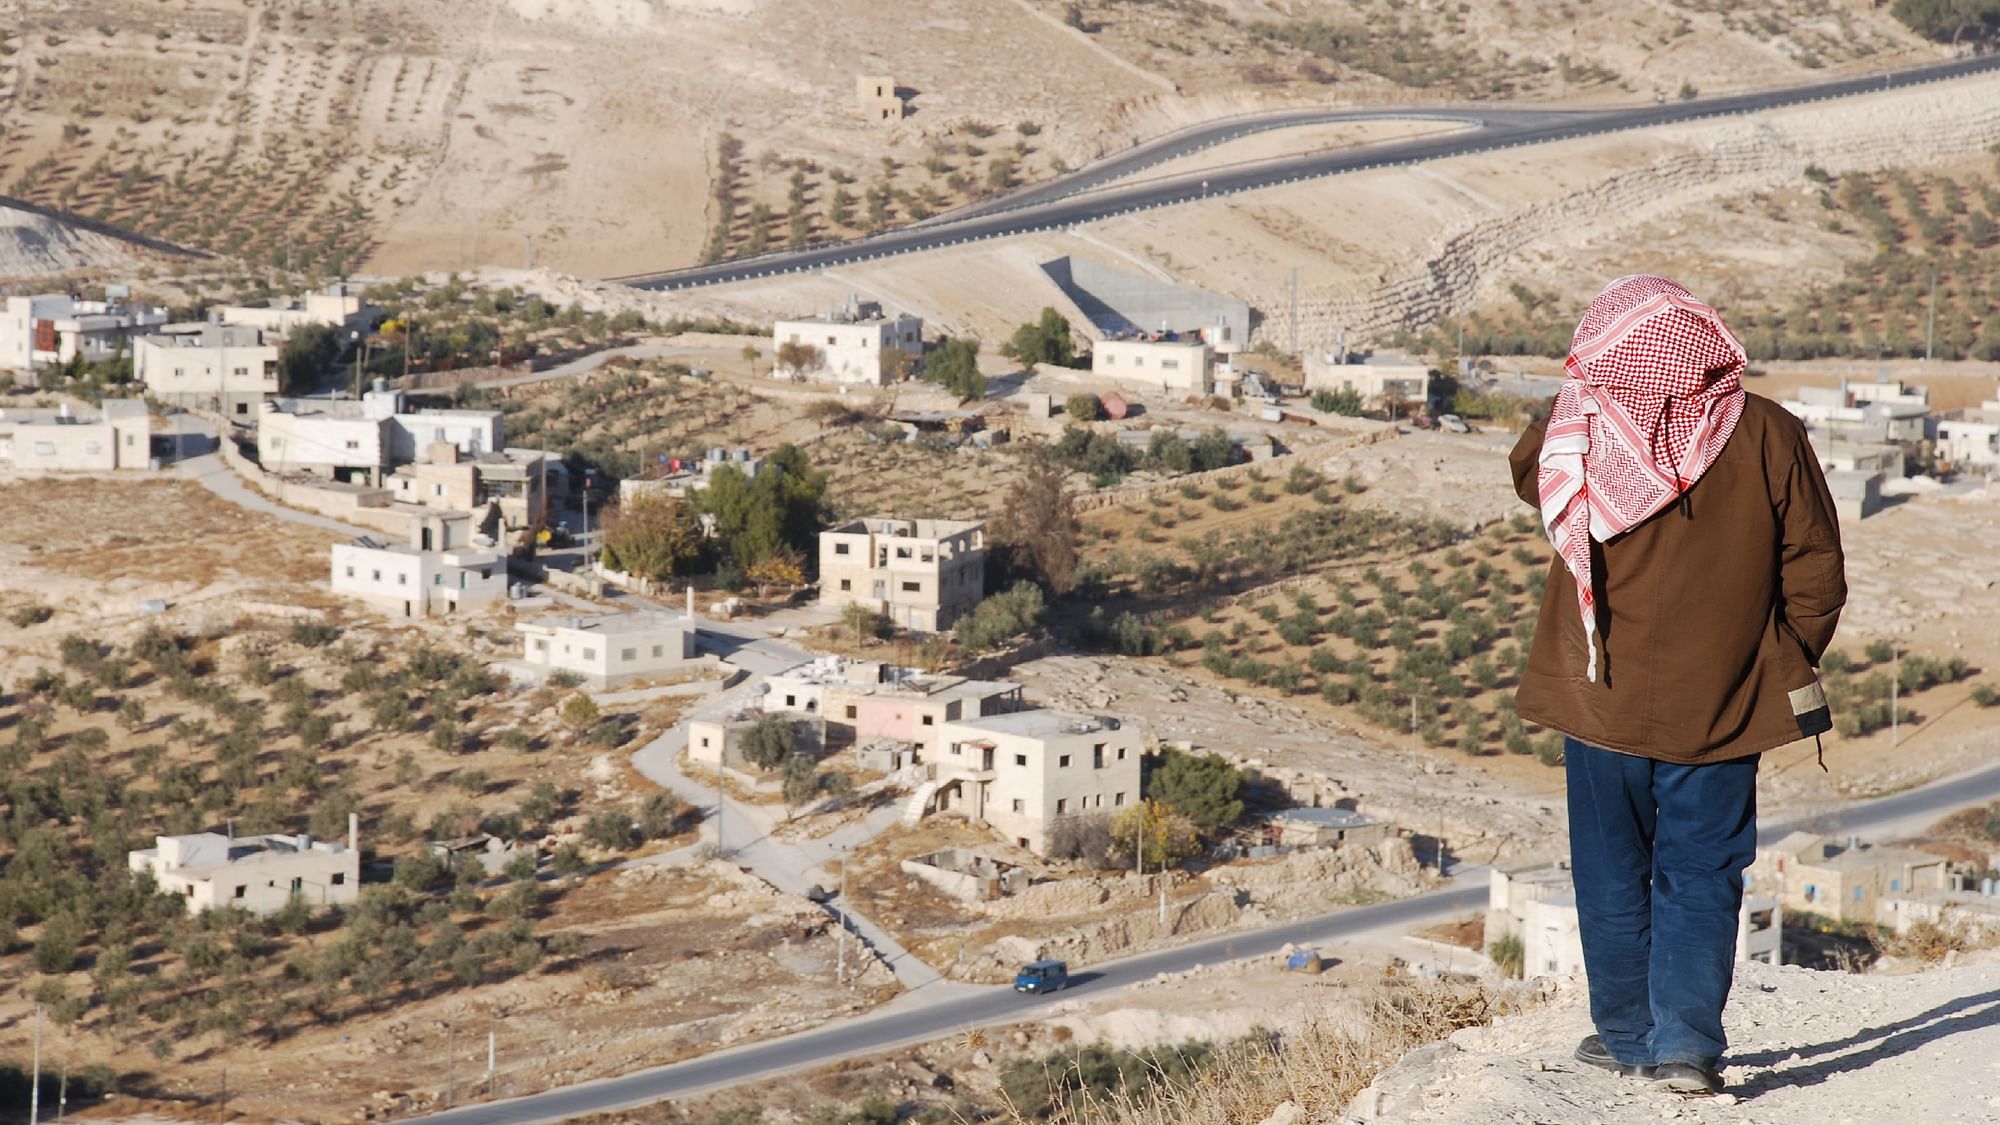 <div class="paragraphs"><p>A Palestinian looks at a village on the outskirts of a town in the West Bank.&nbsp;</p></div>